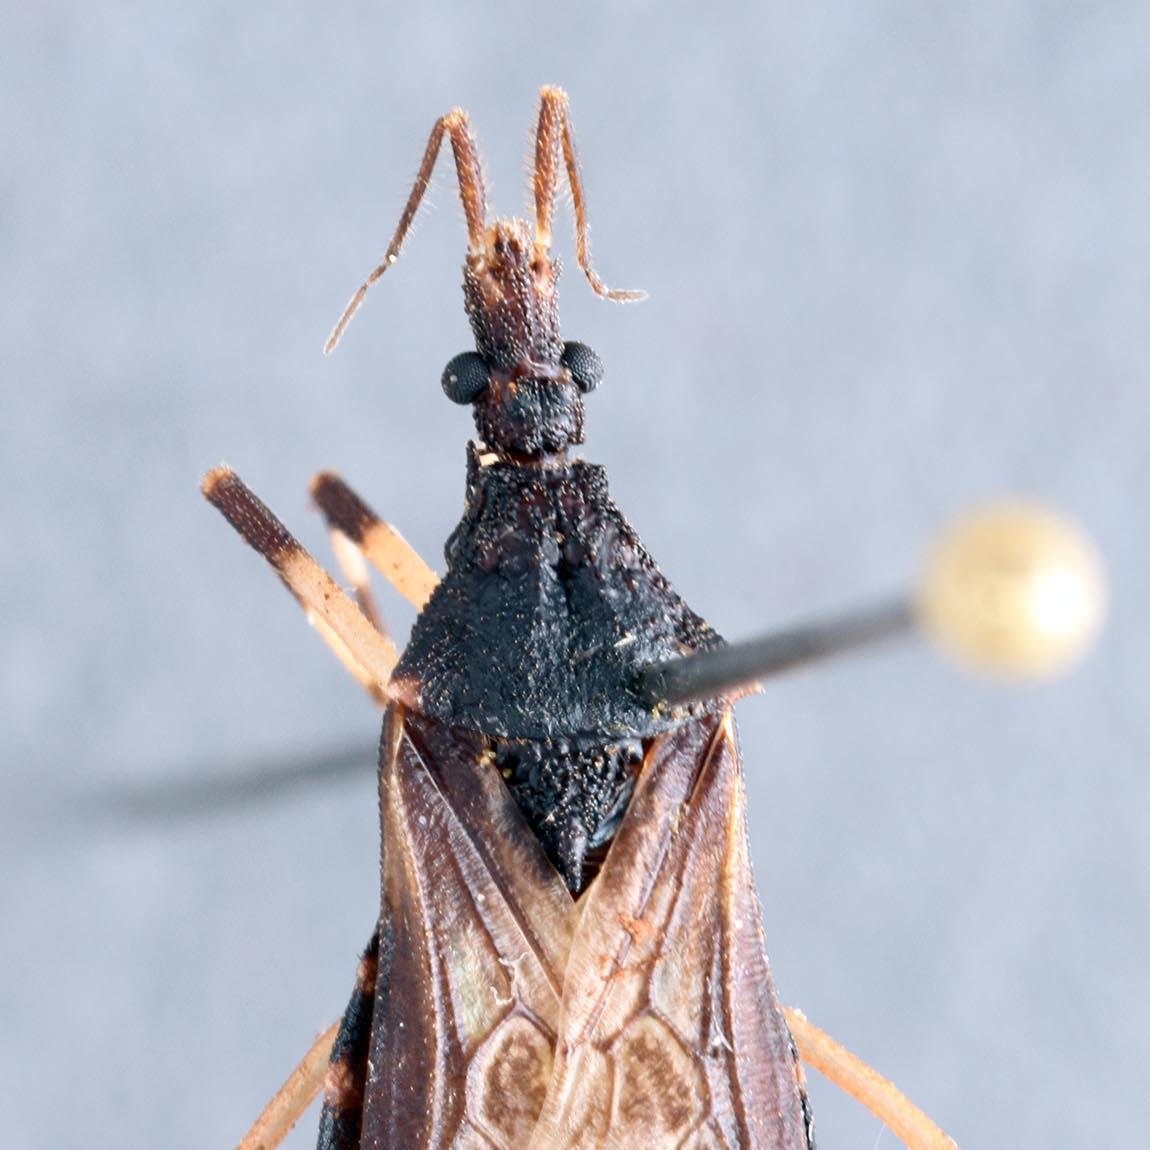 North Carolina State University Insect Collection